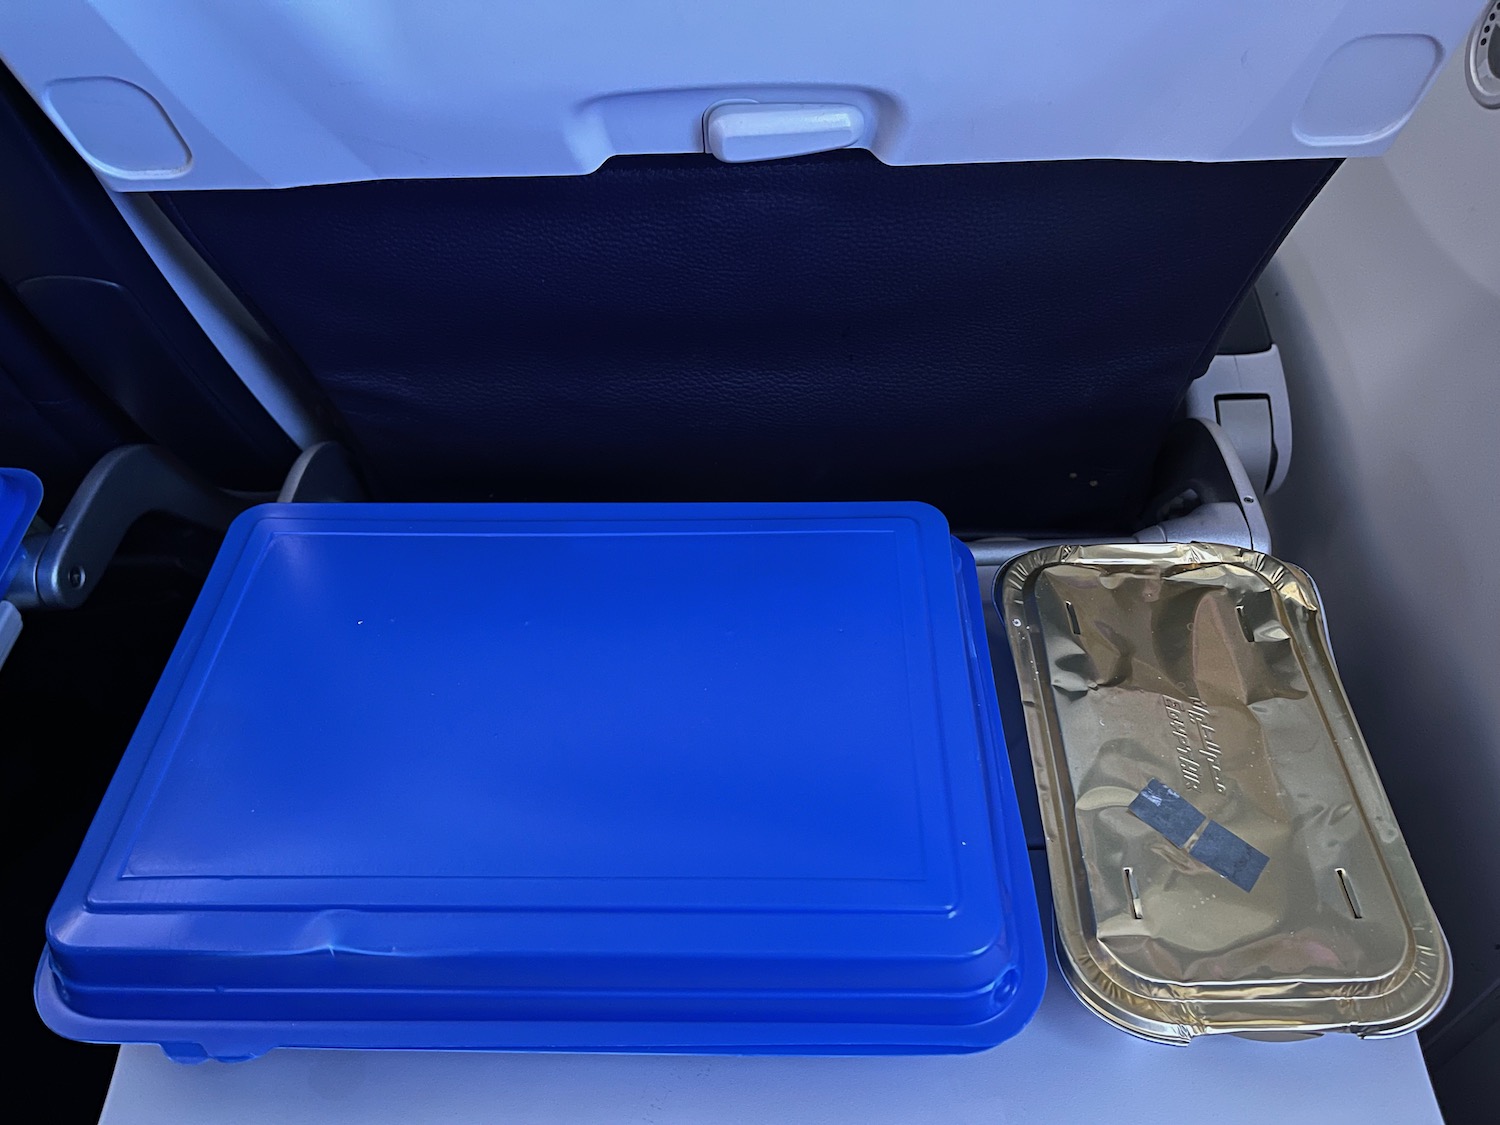 a blue food container in the back of a plane